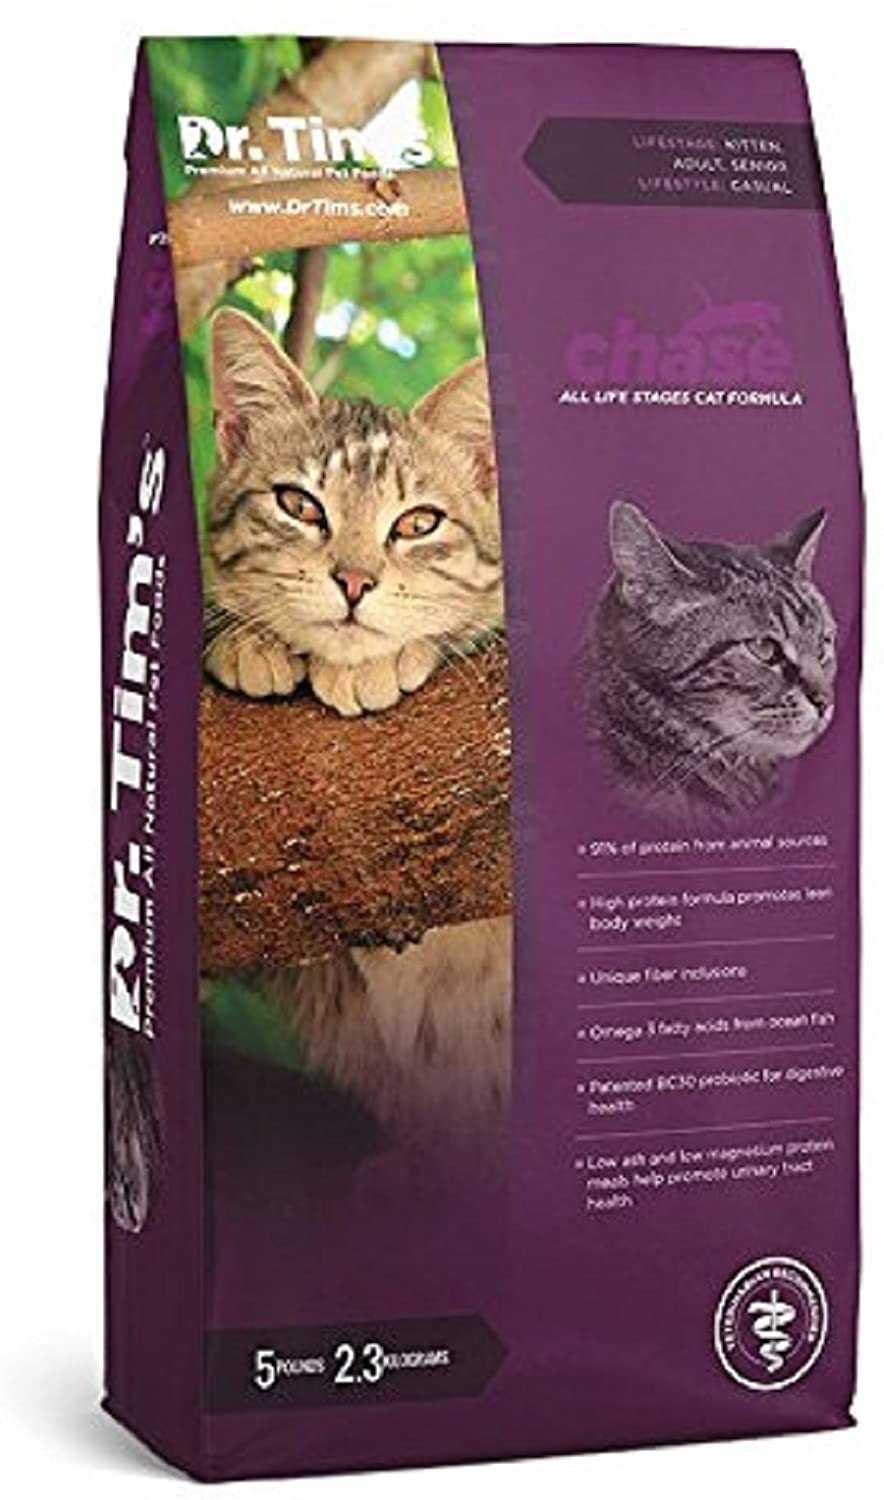 Best Low Carb Cat Food [2021 Review] High Protein Low Carbohydrate